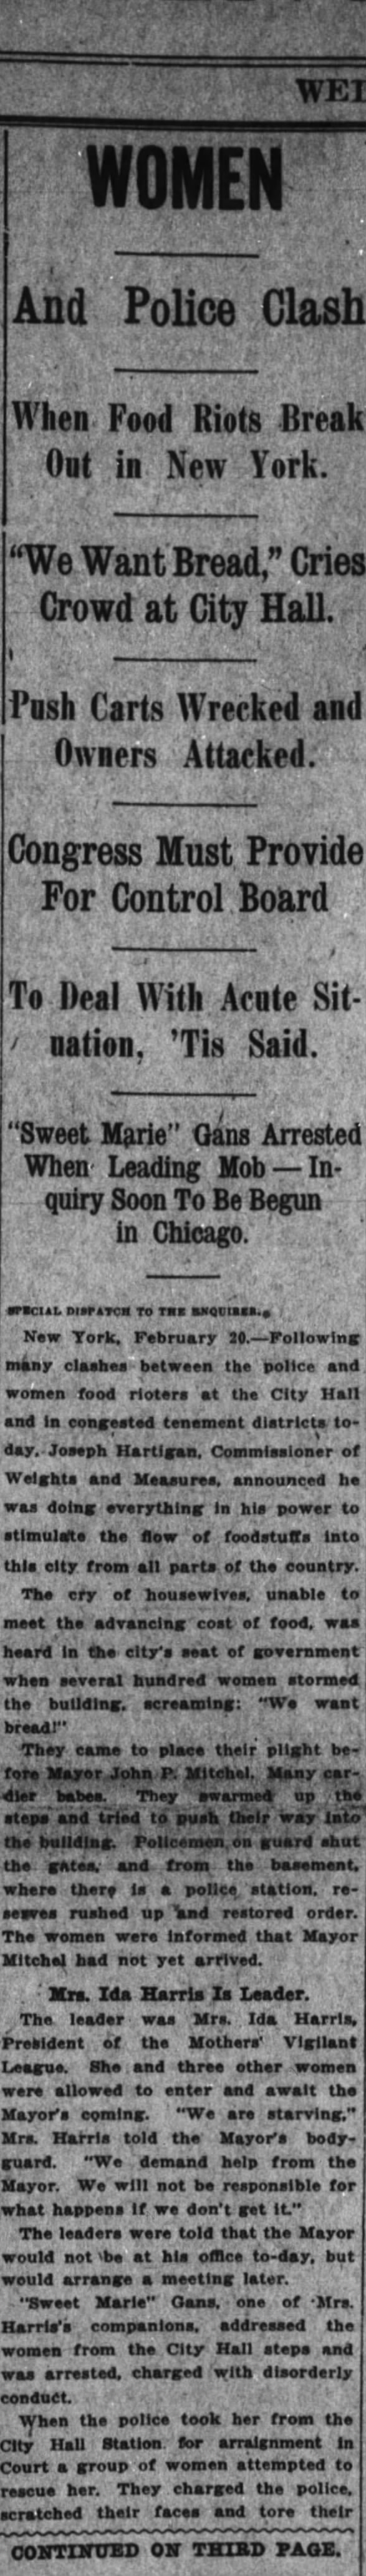 Women Mob City Hall in Food Protest